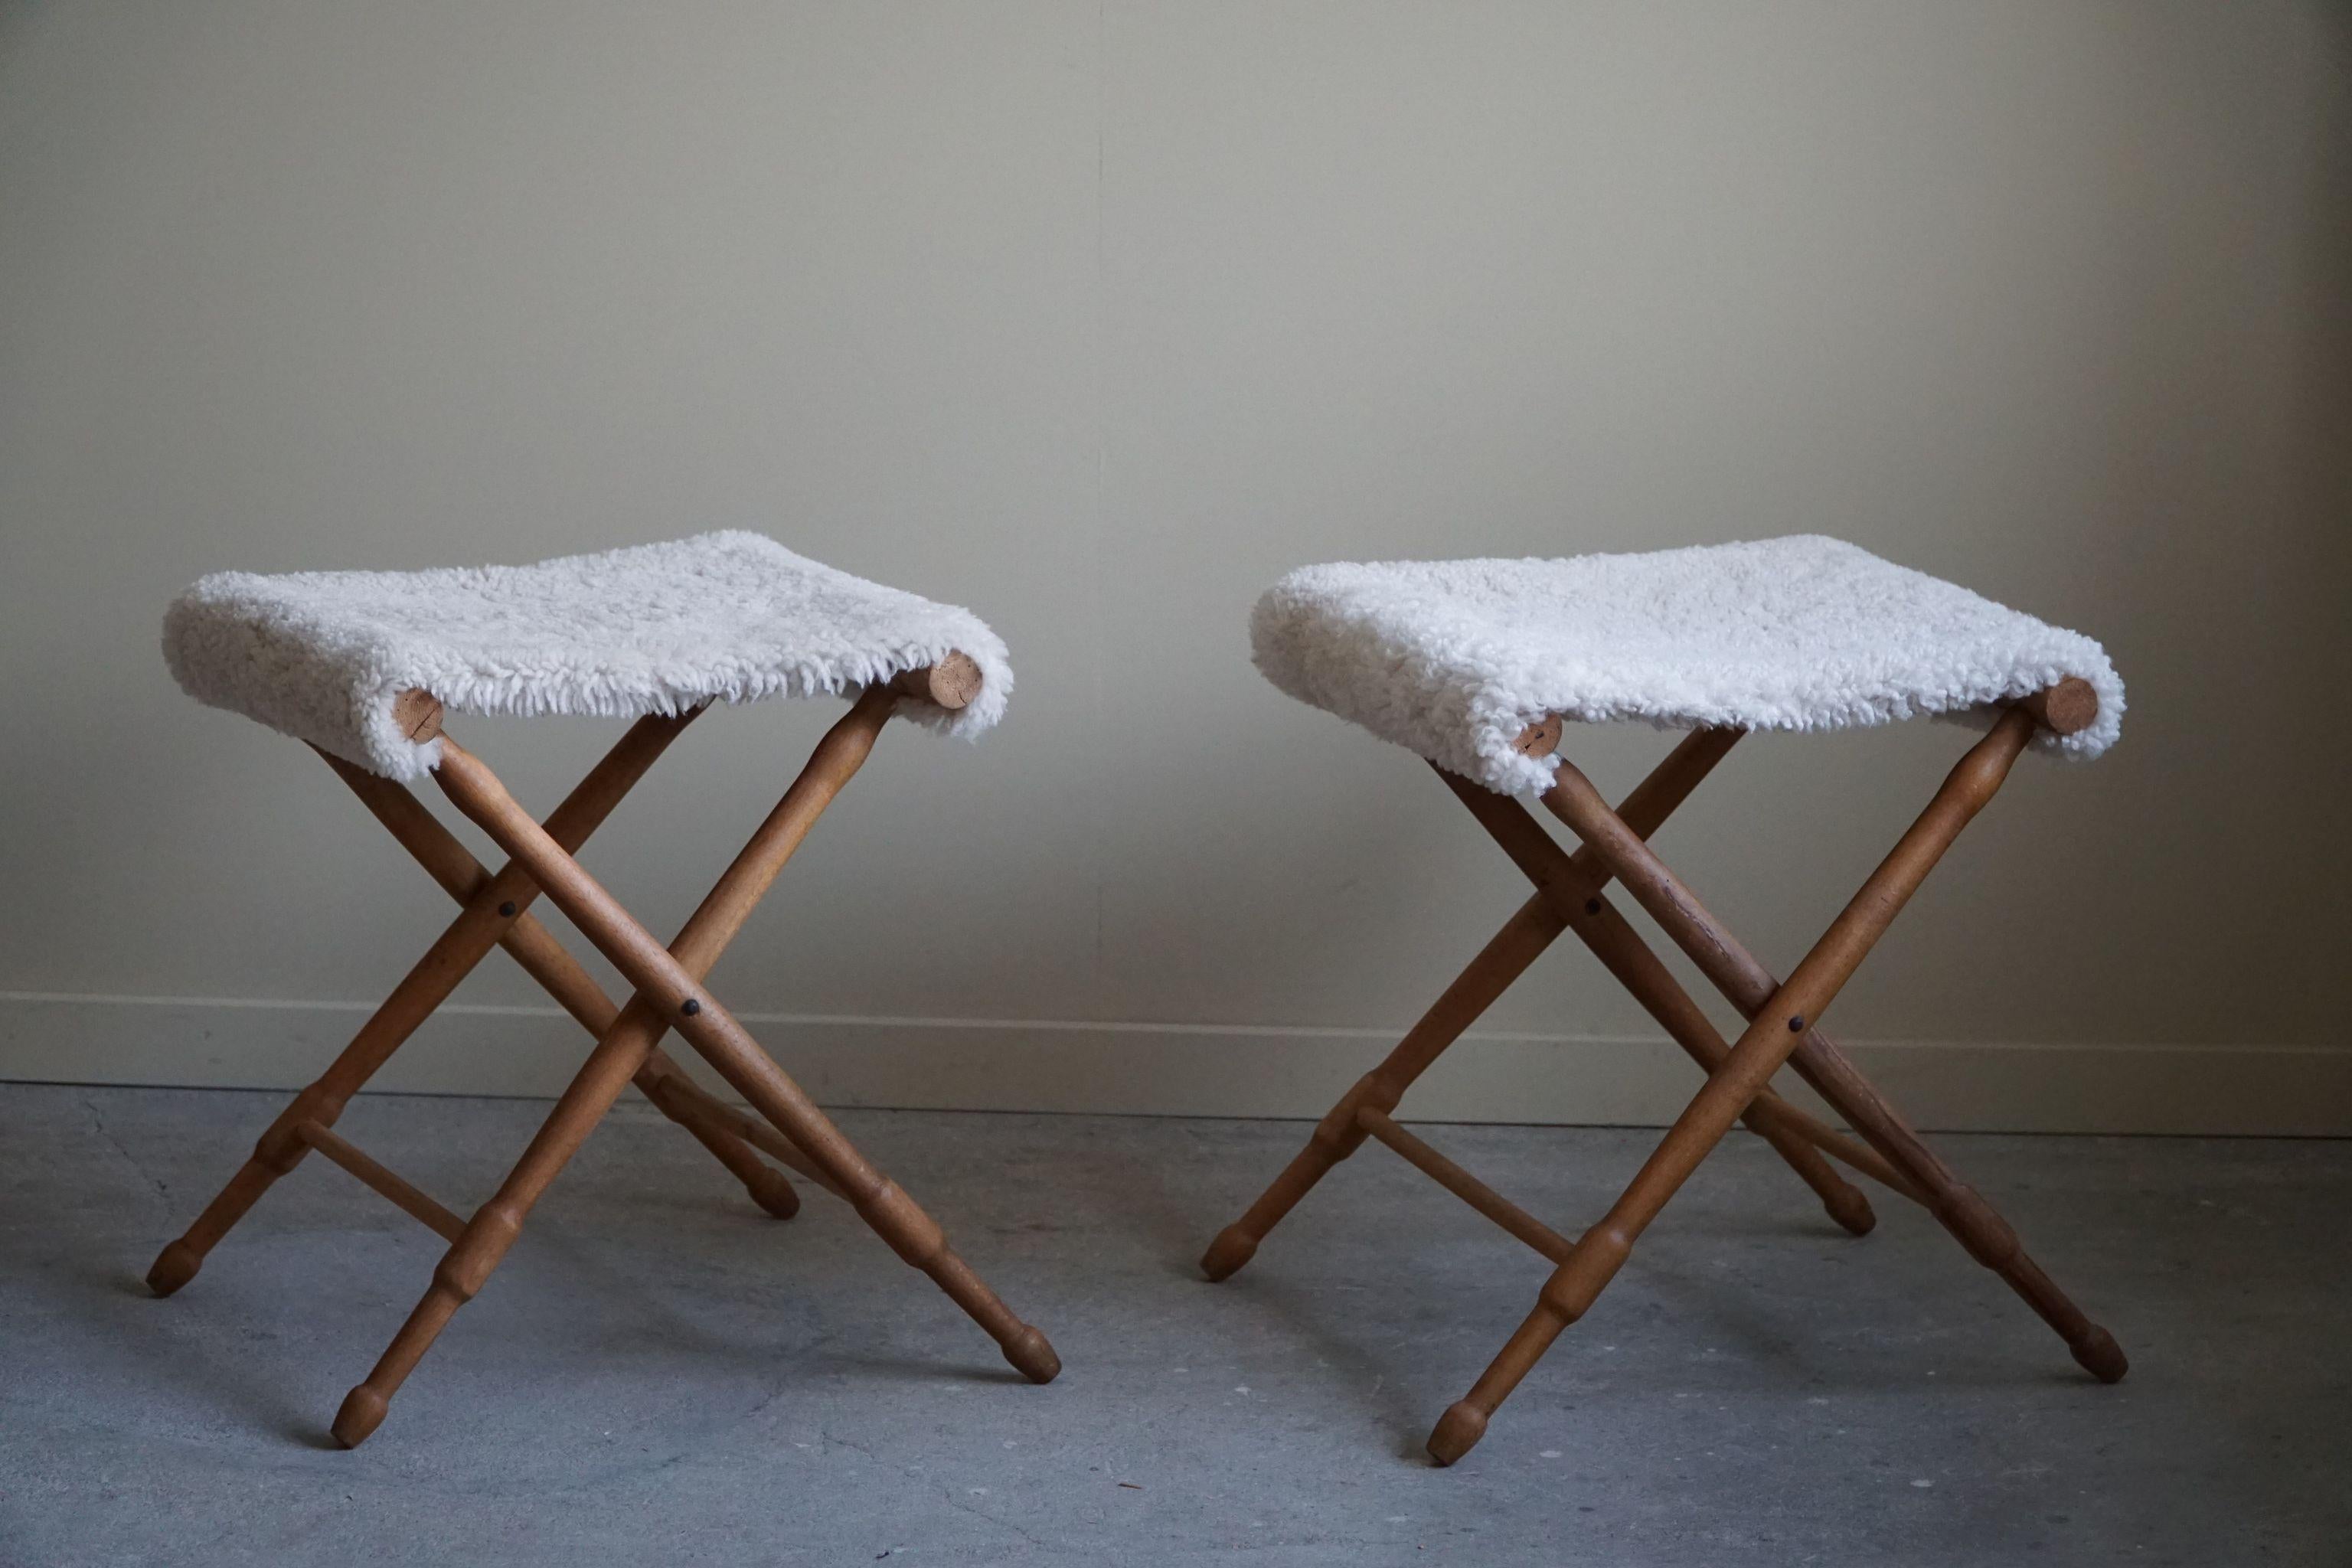 Foldable Stools, Reupholstered in Lambswool, Danish Mid-Century Modern, 1950s 1